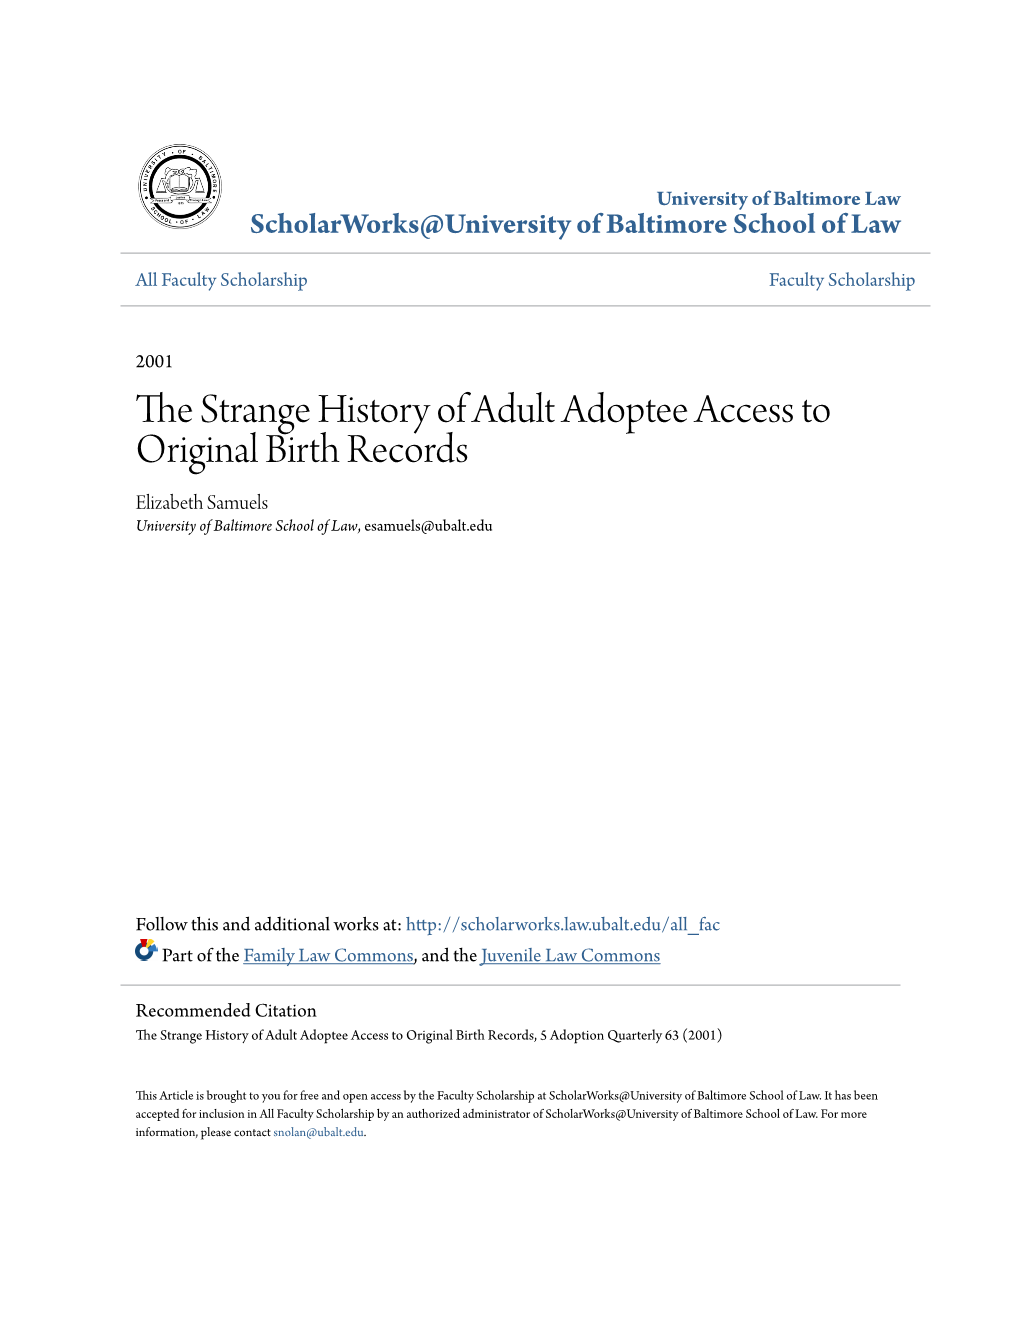 The Strange History of Adult Adoptee Access to Original Birth Records